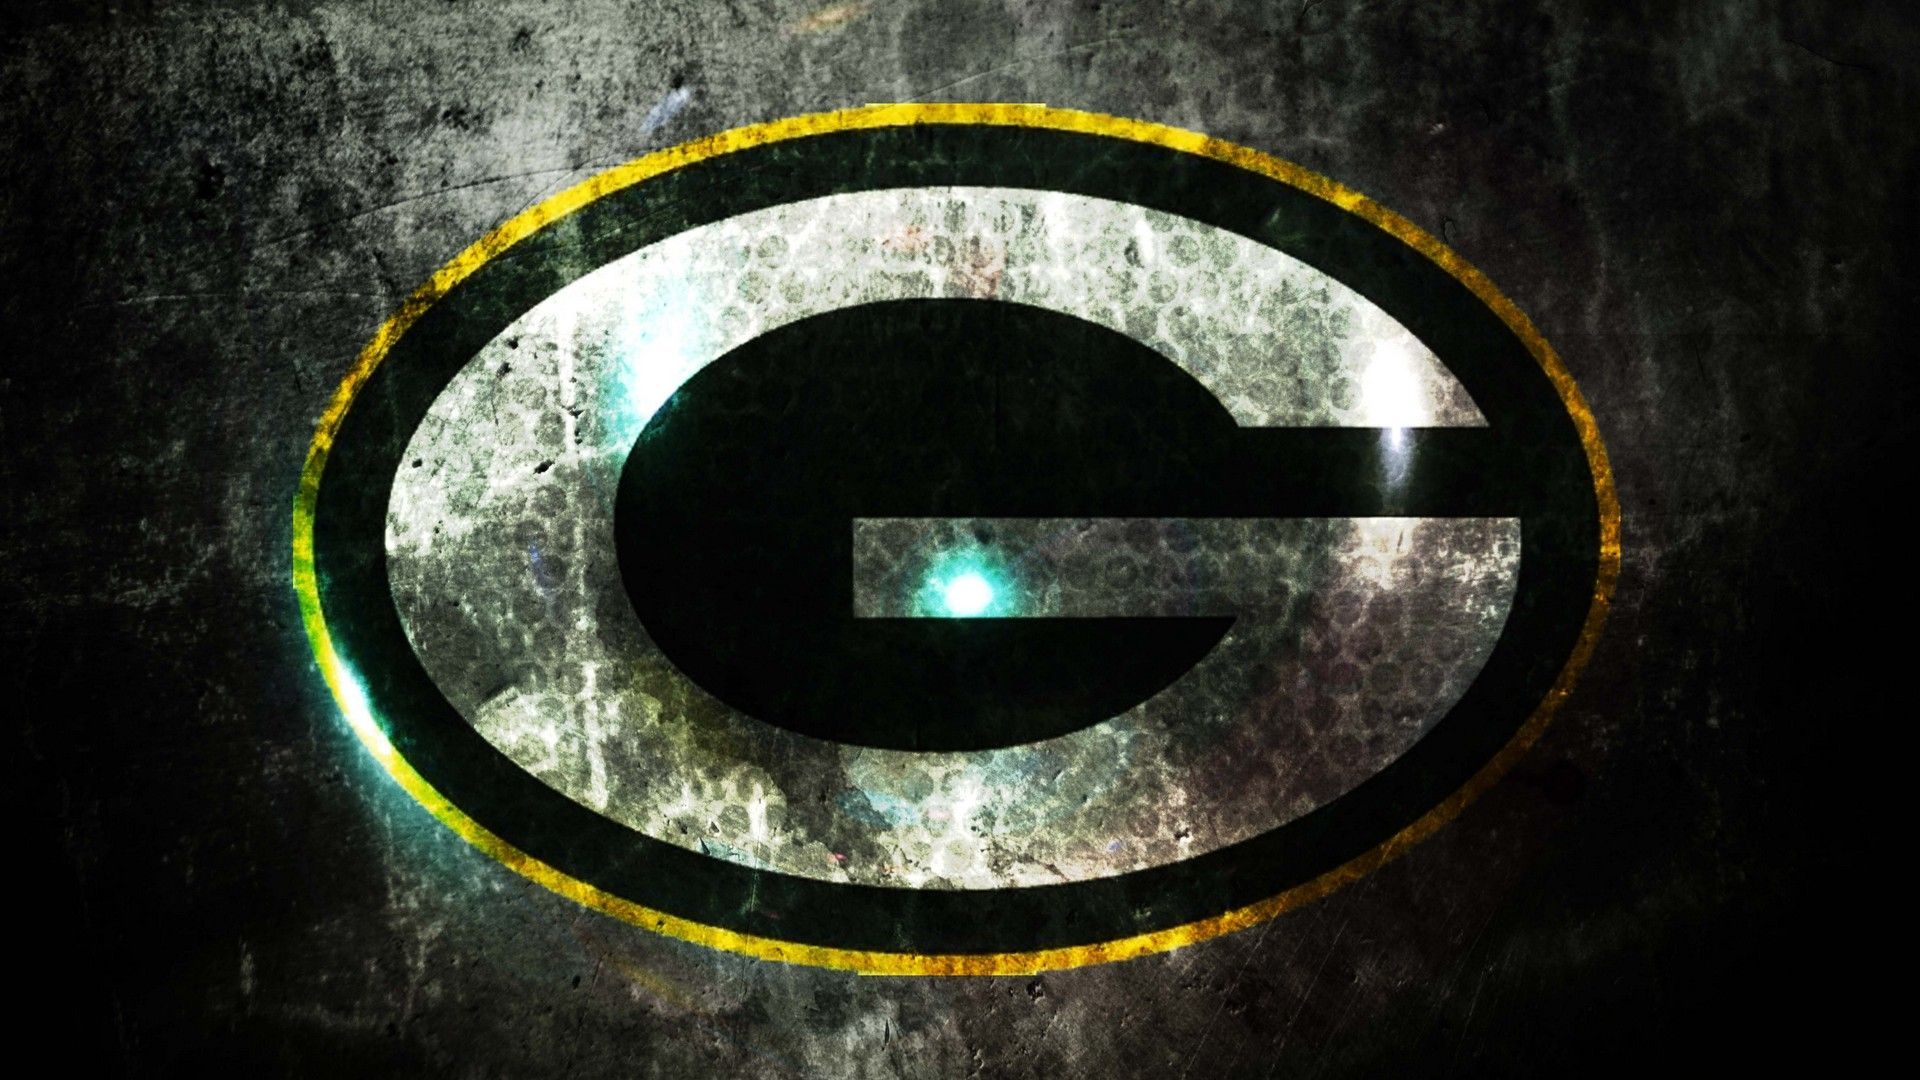 Green Bay Packers 2021 Wallpapers - Wallpaper Cave